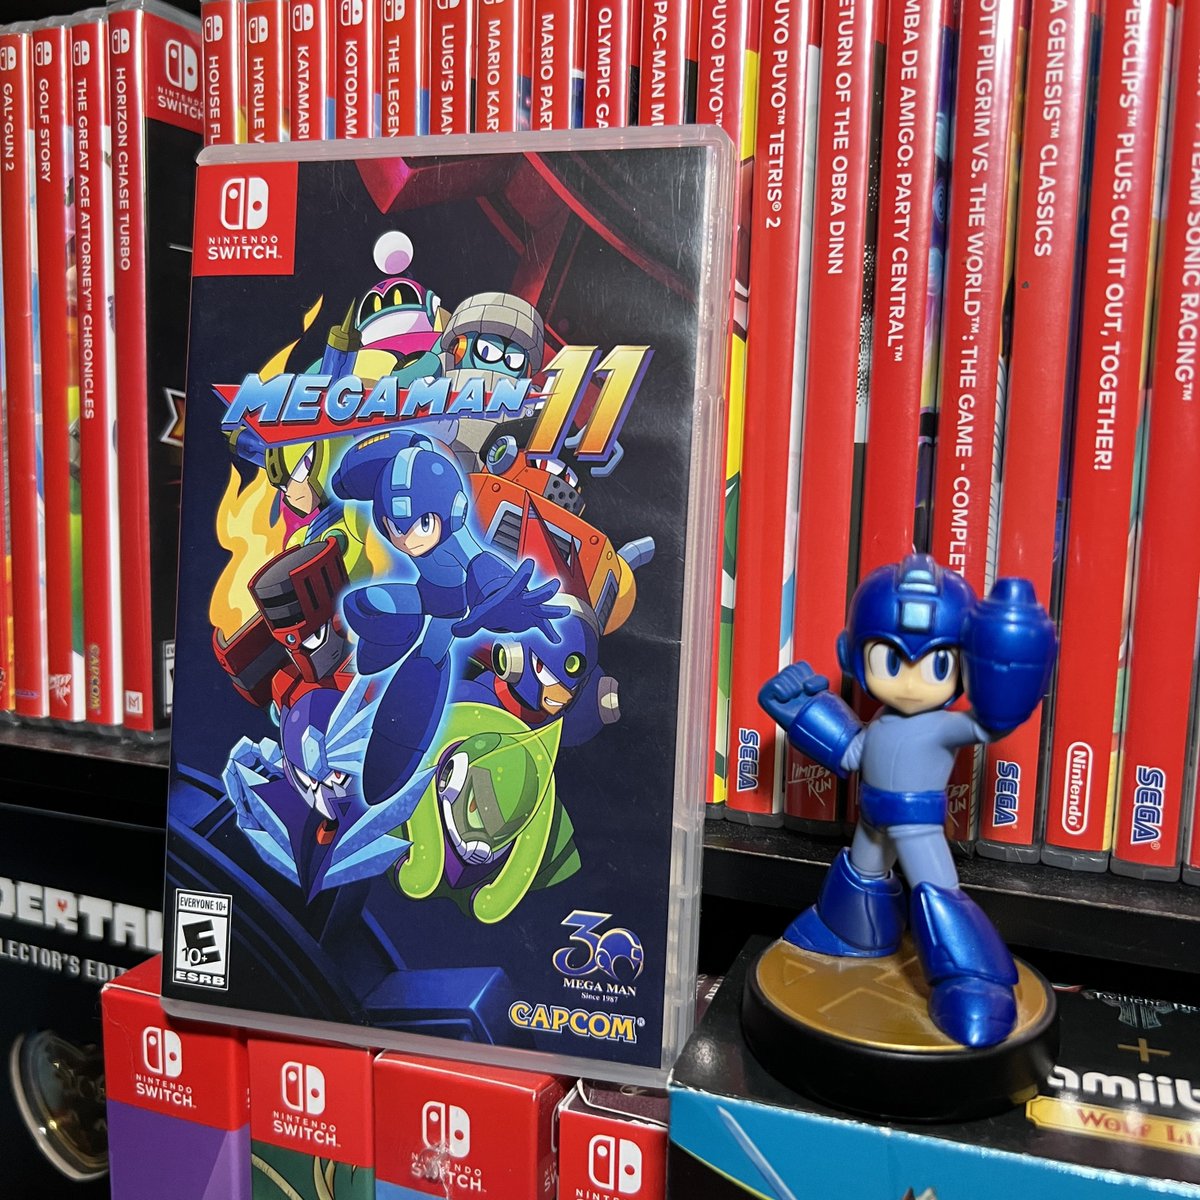 Mega May continues and I'm taking on Mega Man 11 for the First Time!! Let's see how this classic comeback fared~ #MegaMan #CapcomCreators

🔵 ttv / gtothenextlevel 🟣